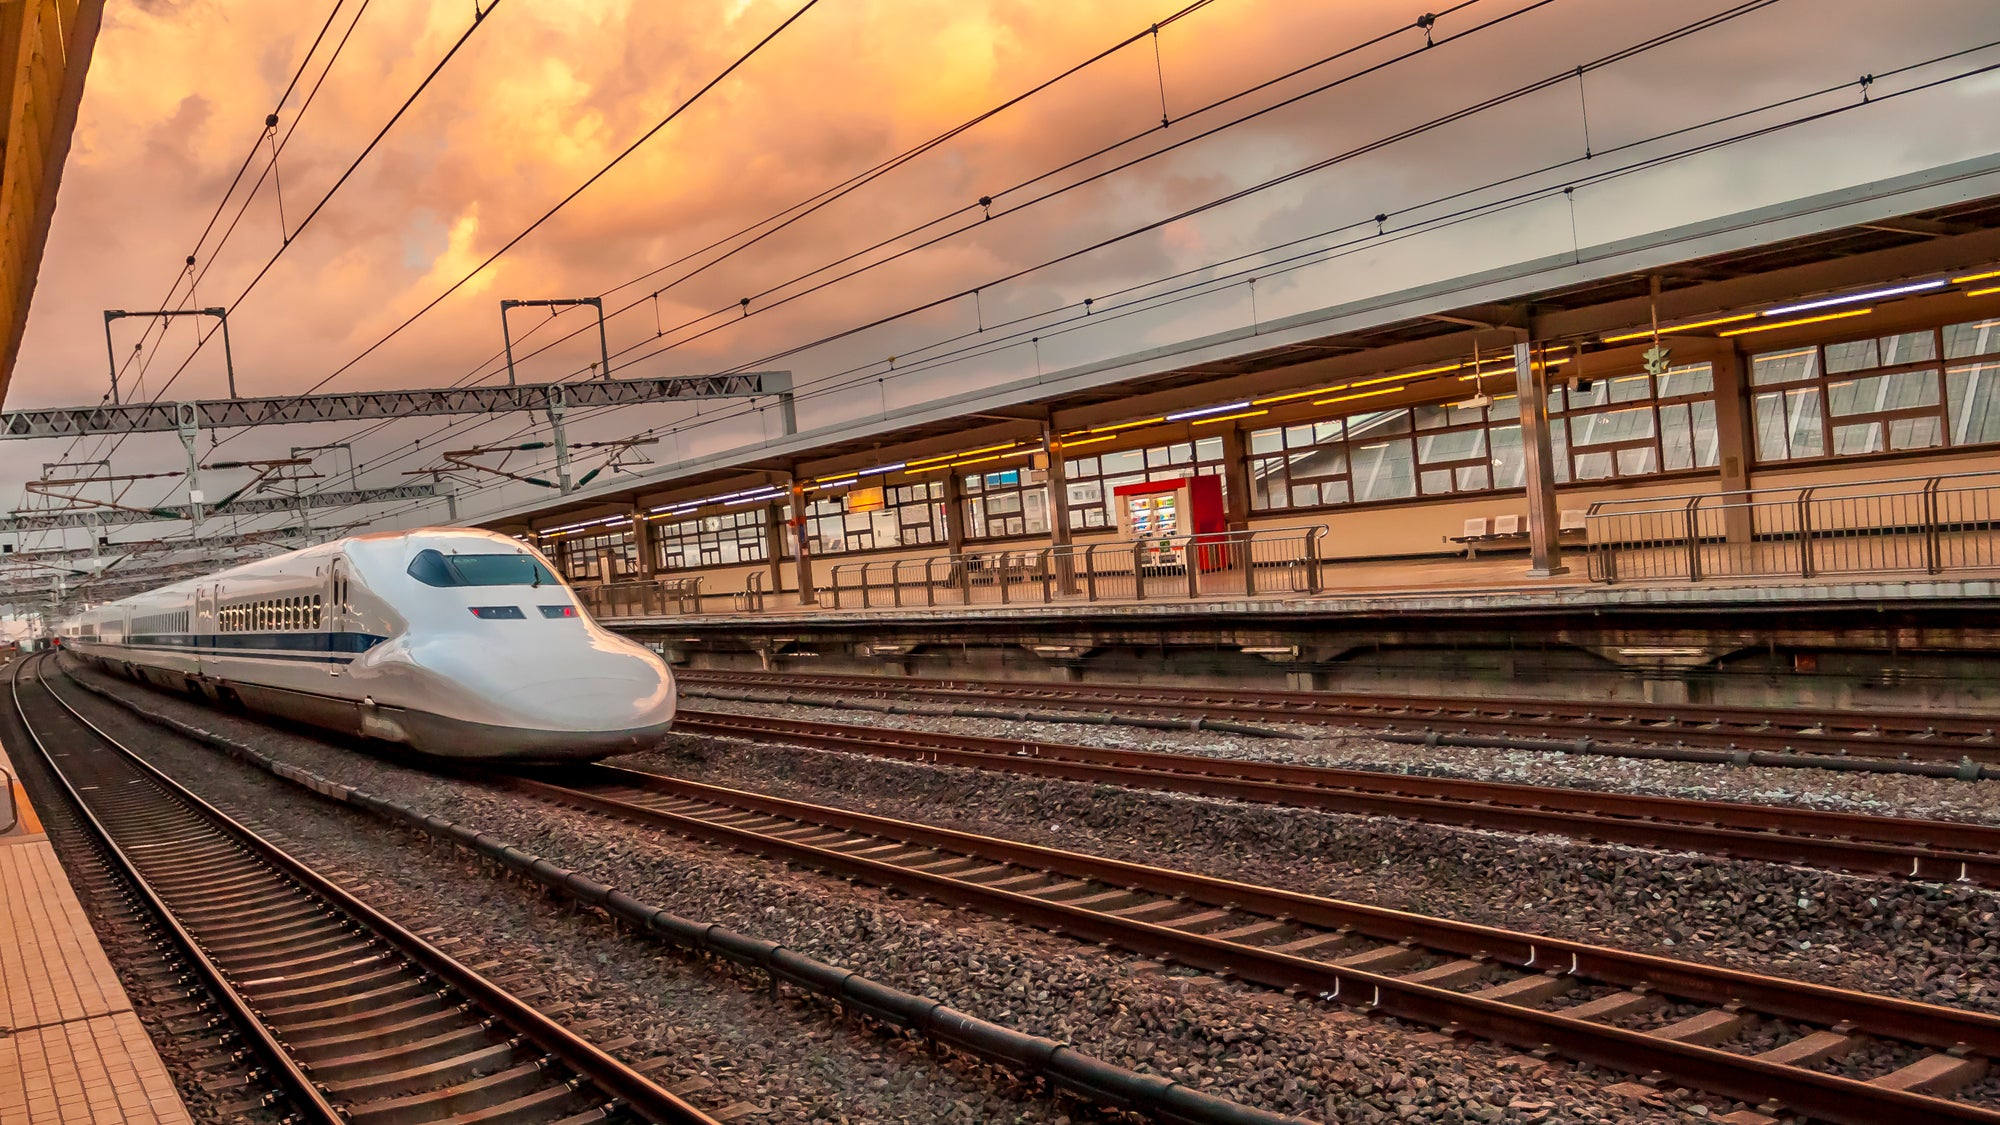 Texas could get a 205-mph bullet train zipping between Houston and Dallas